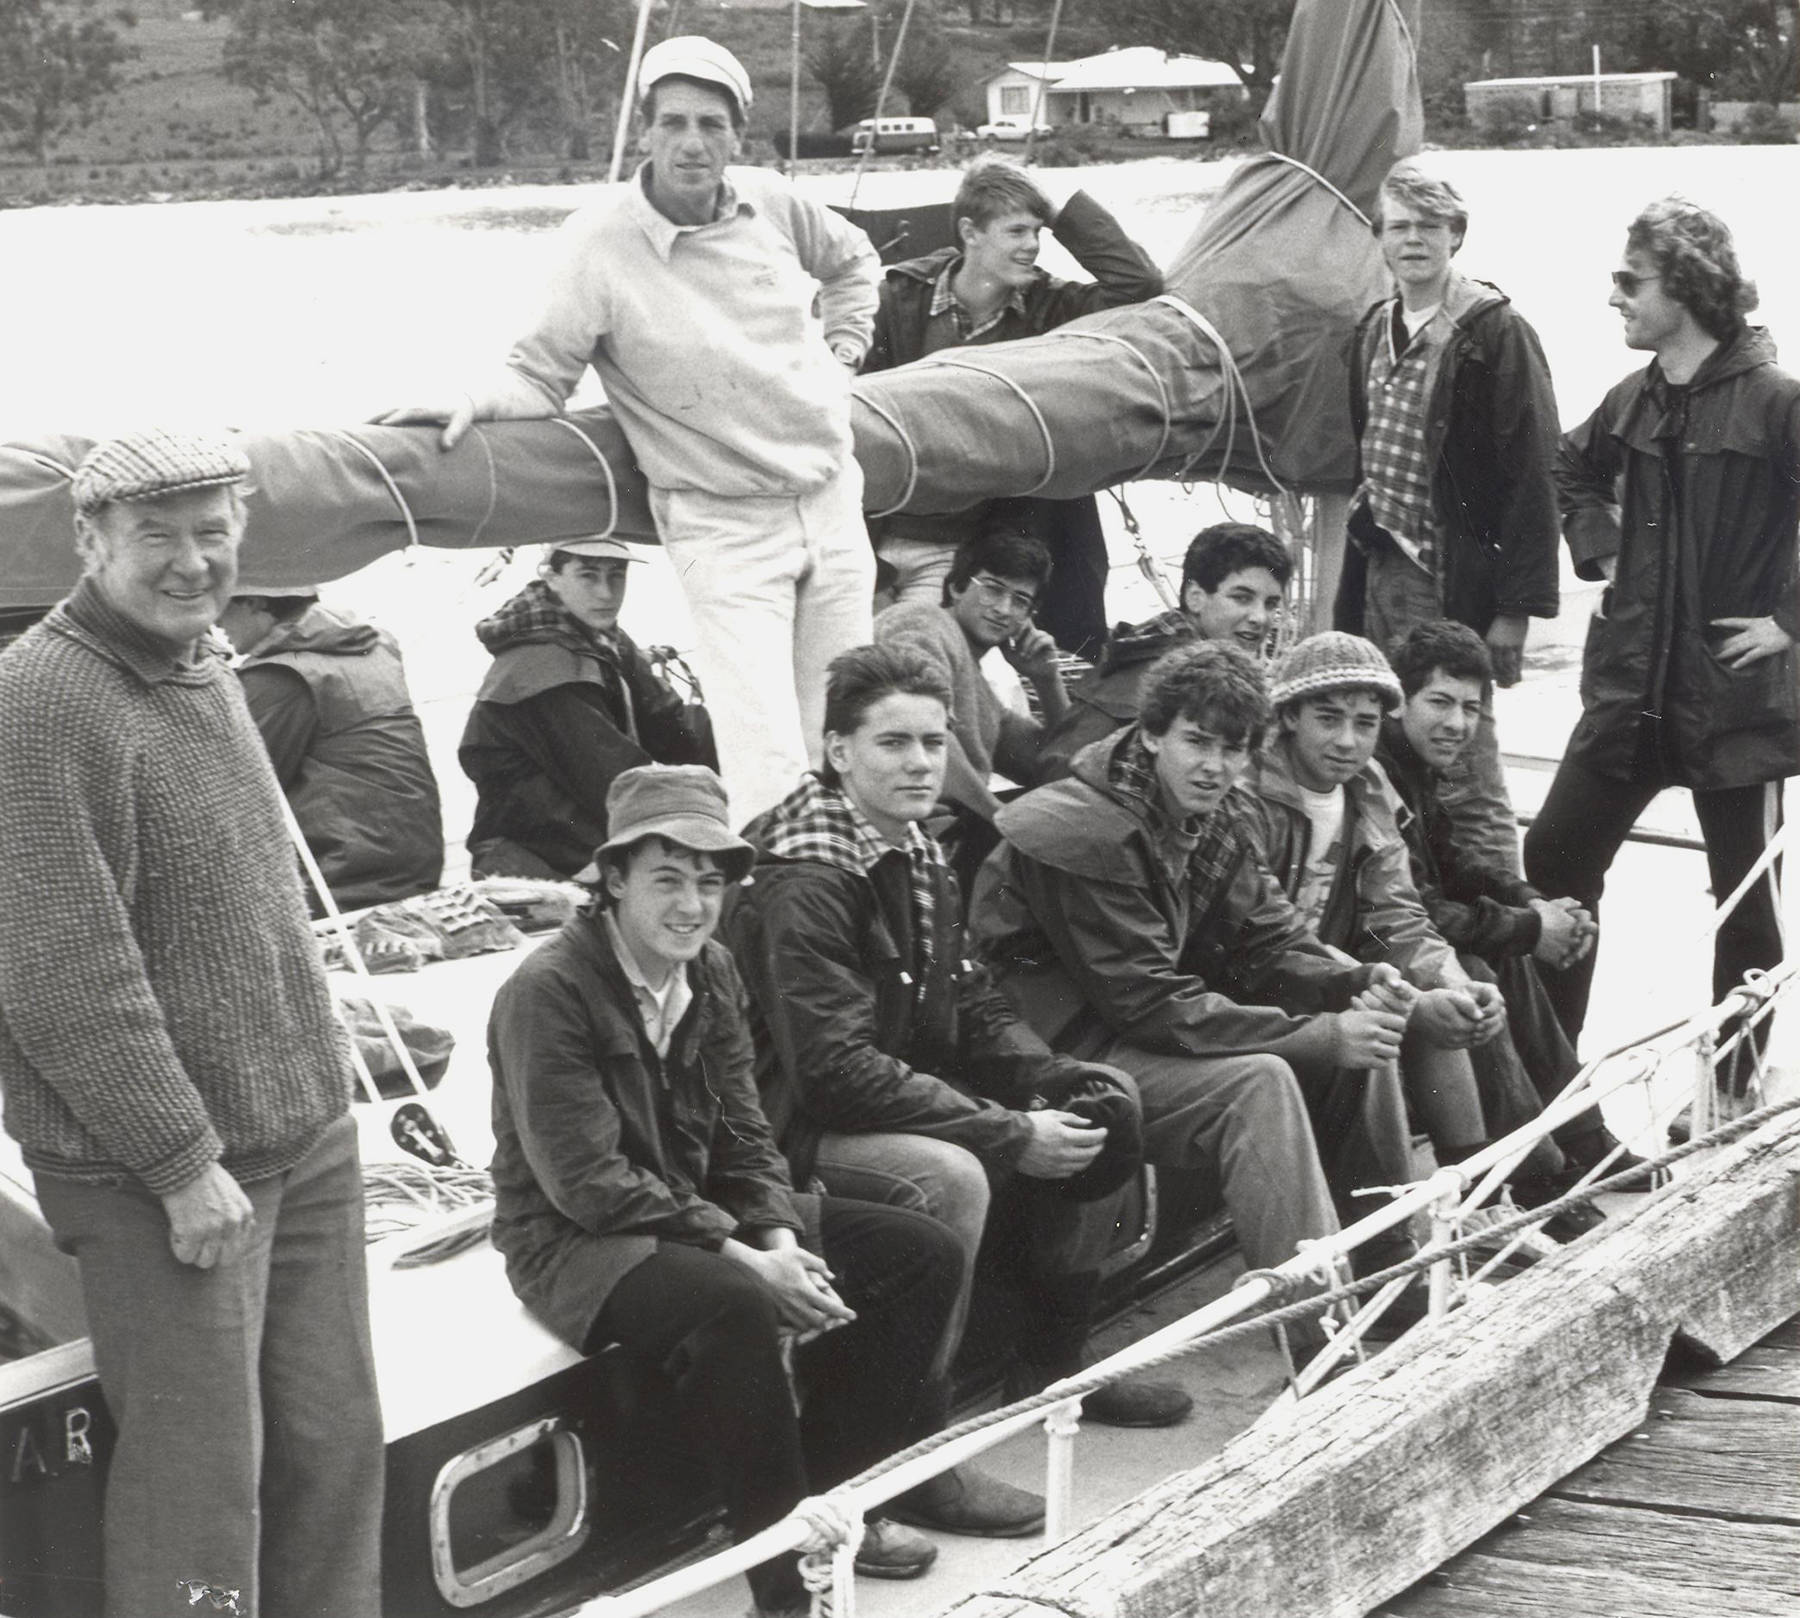 Mr Hay and Year 10 campers sailing, 1986